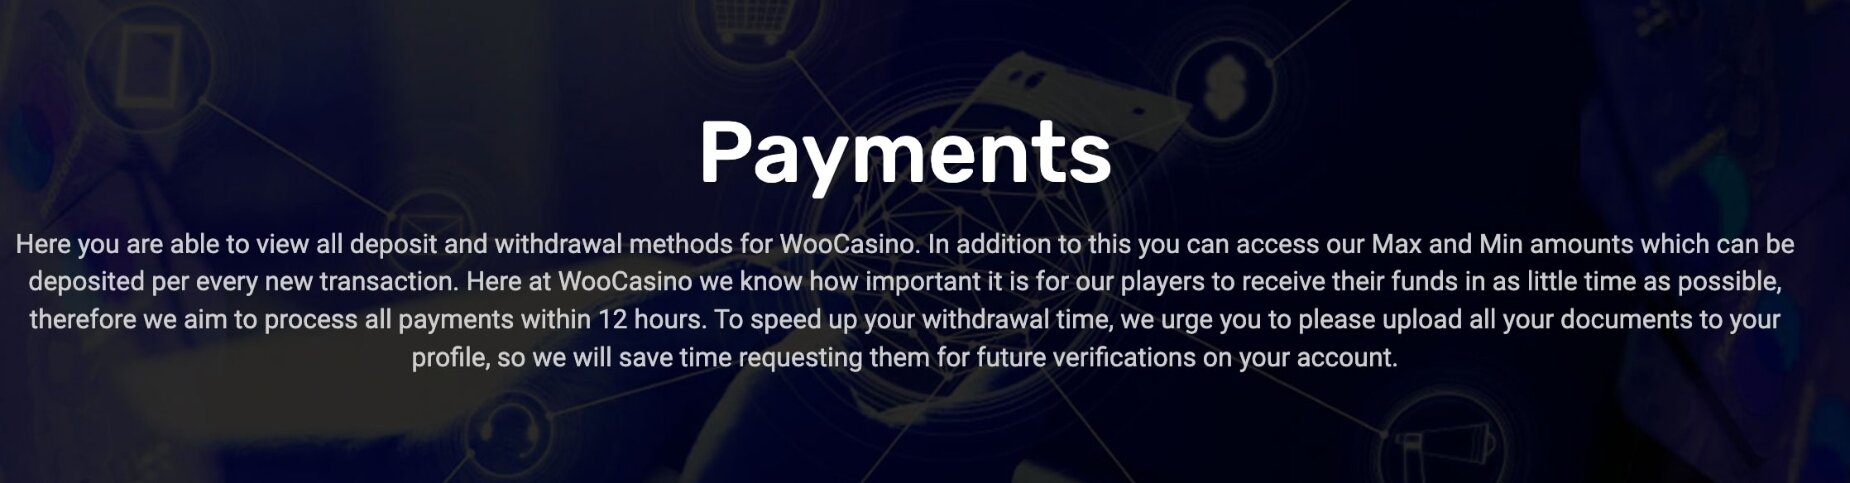 woocasino payments